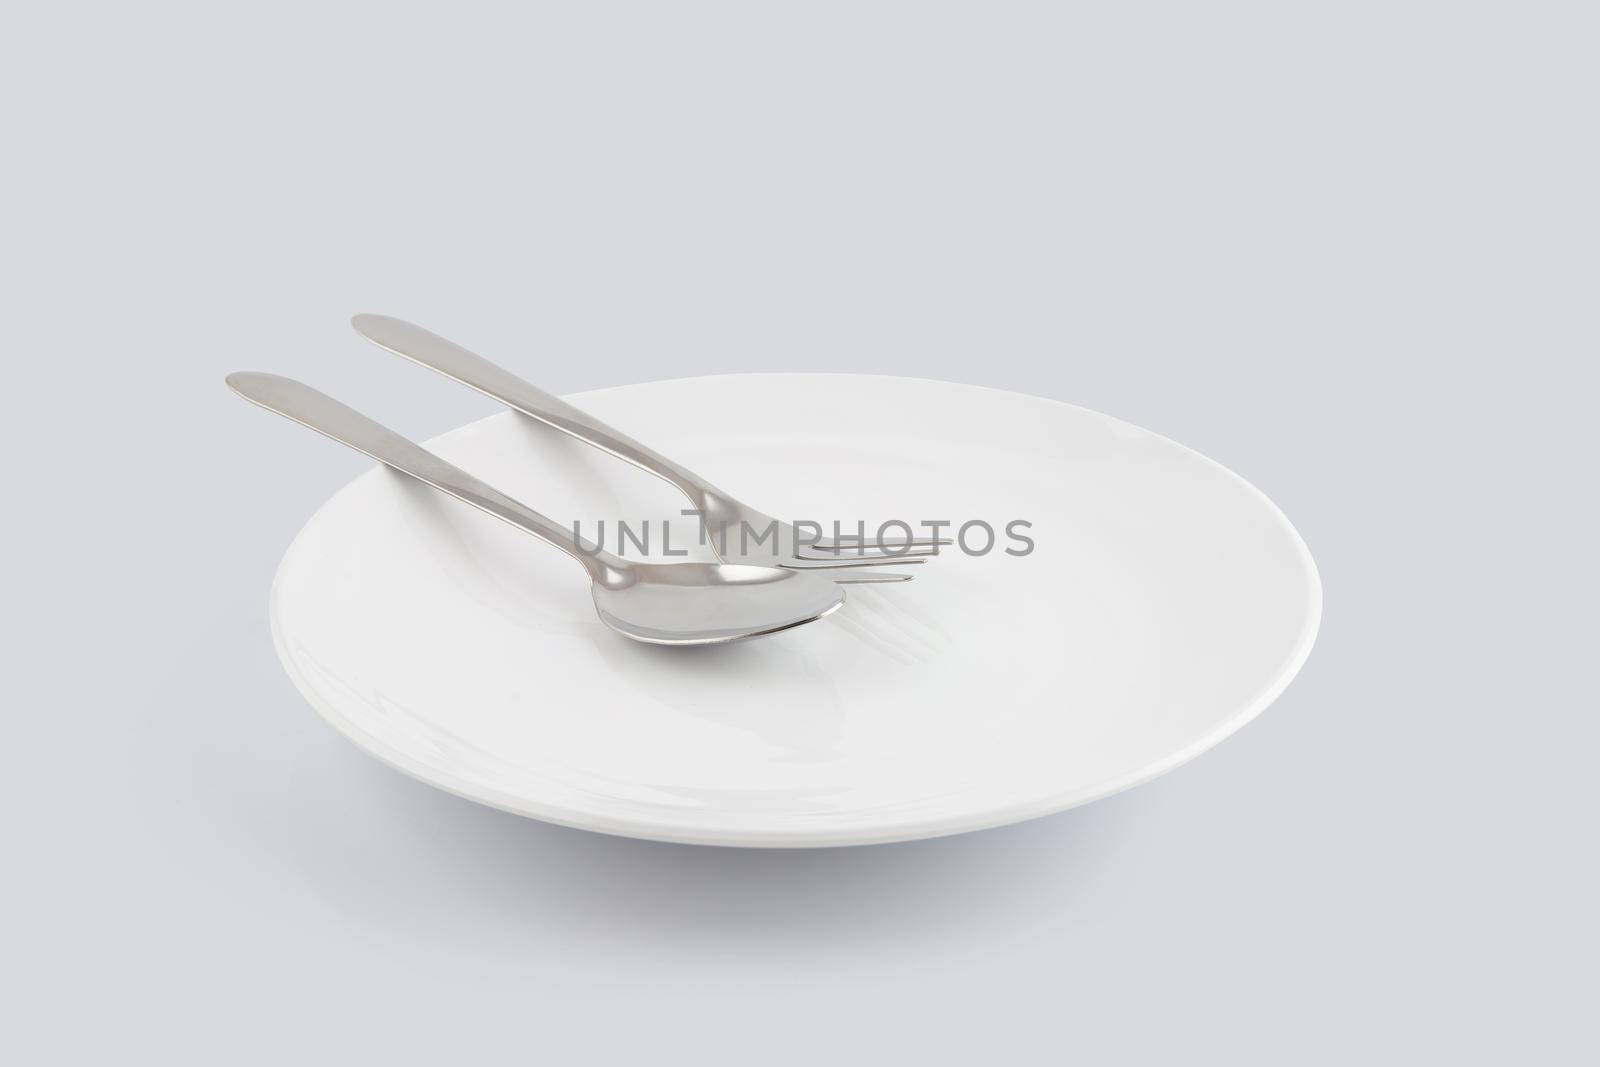 Dish spoon and fork isolated on white background, utensil for food, ceramic plate with empty, kitchenware or dishware with stainless in studio, object concept. by nnudoo